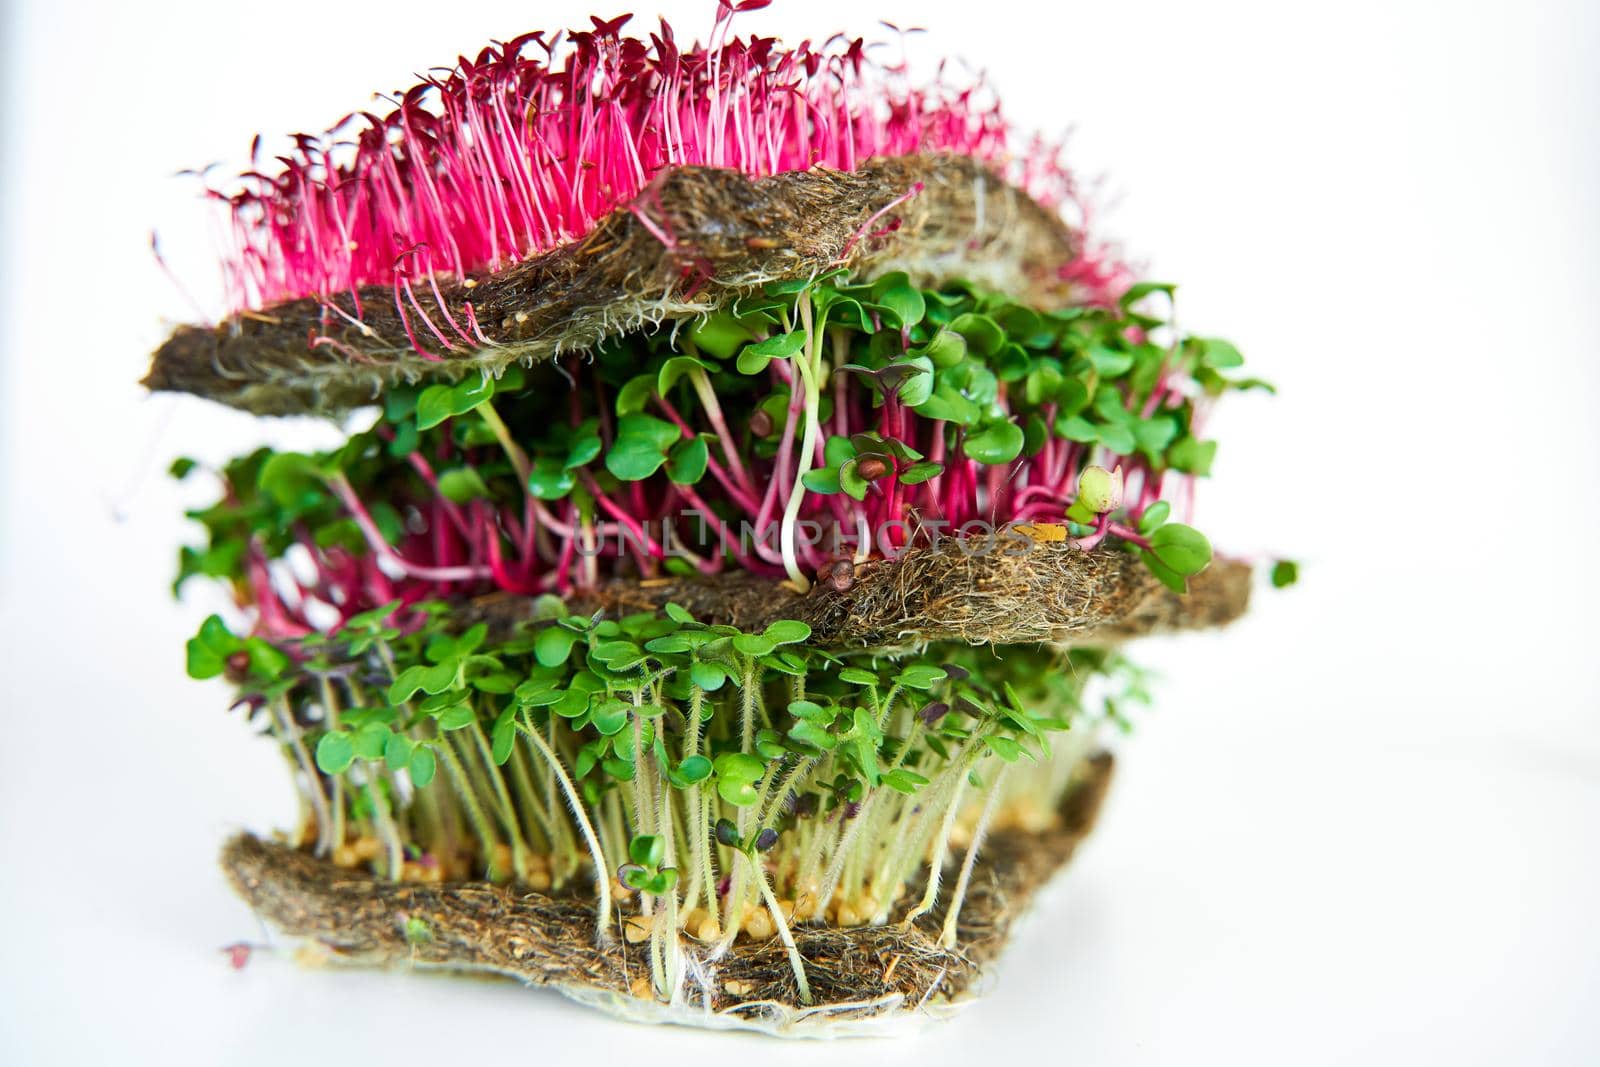 Microgreen plants mix of various plants. Person holding in hand. Growing microgreen mustard, chia, amaranth, radish seeds. Dense greenery growed on fabric. Against white background.